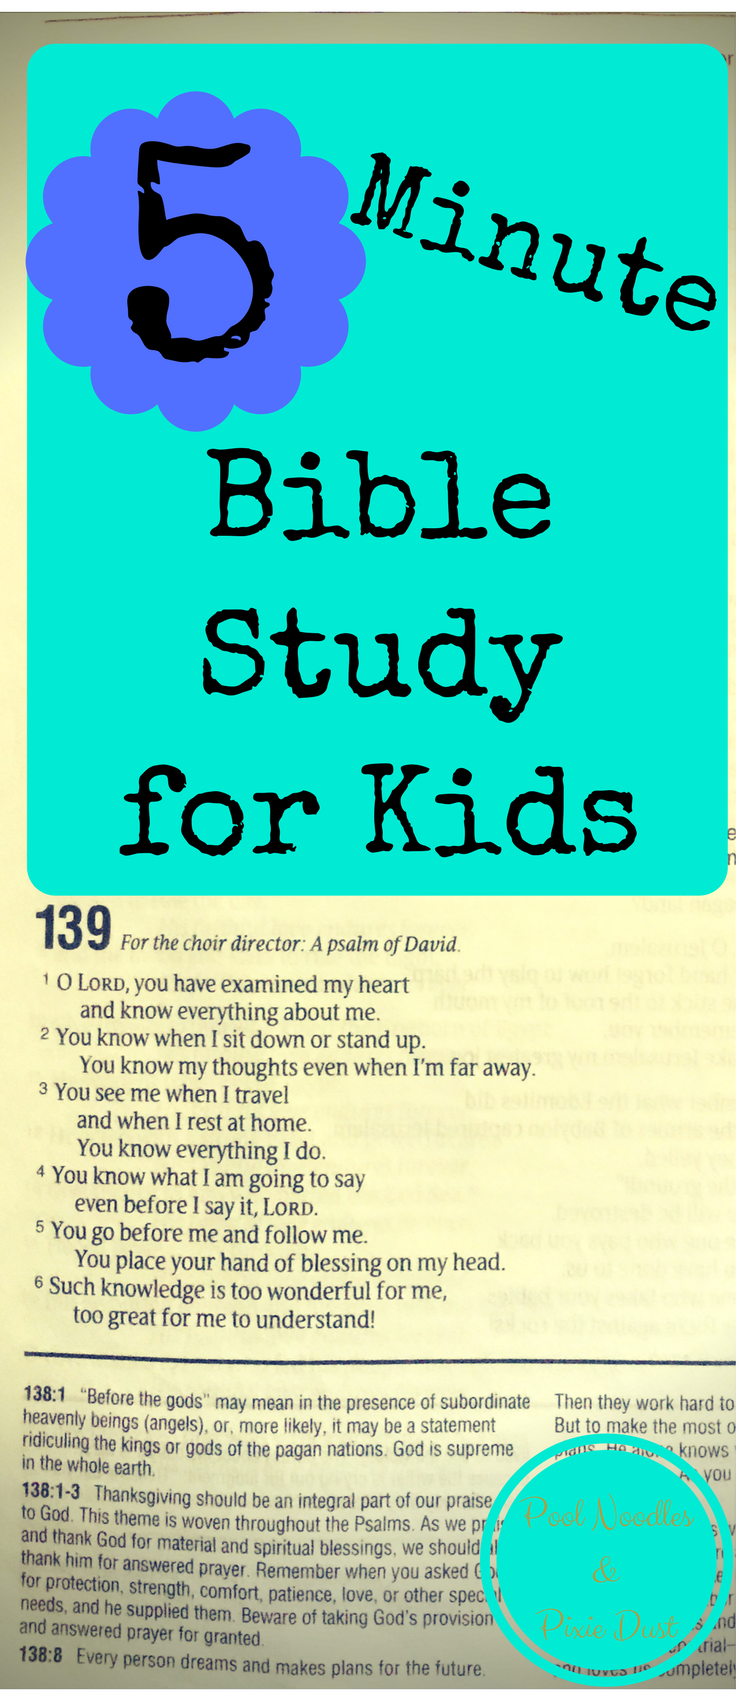 Simplify your Homeschool with 5-Minute Bible Studies for Kids